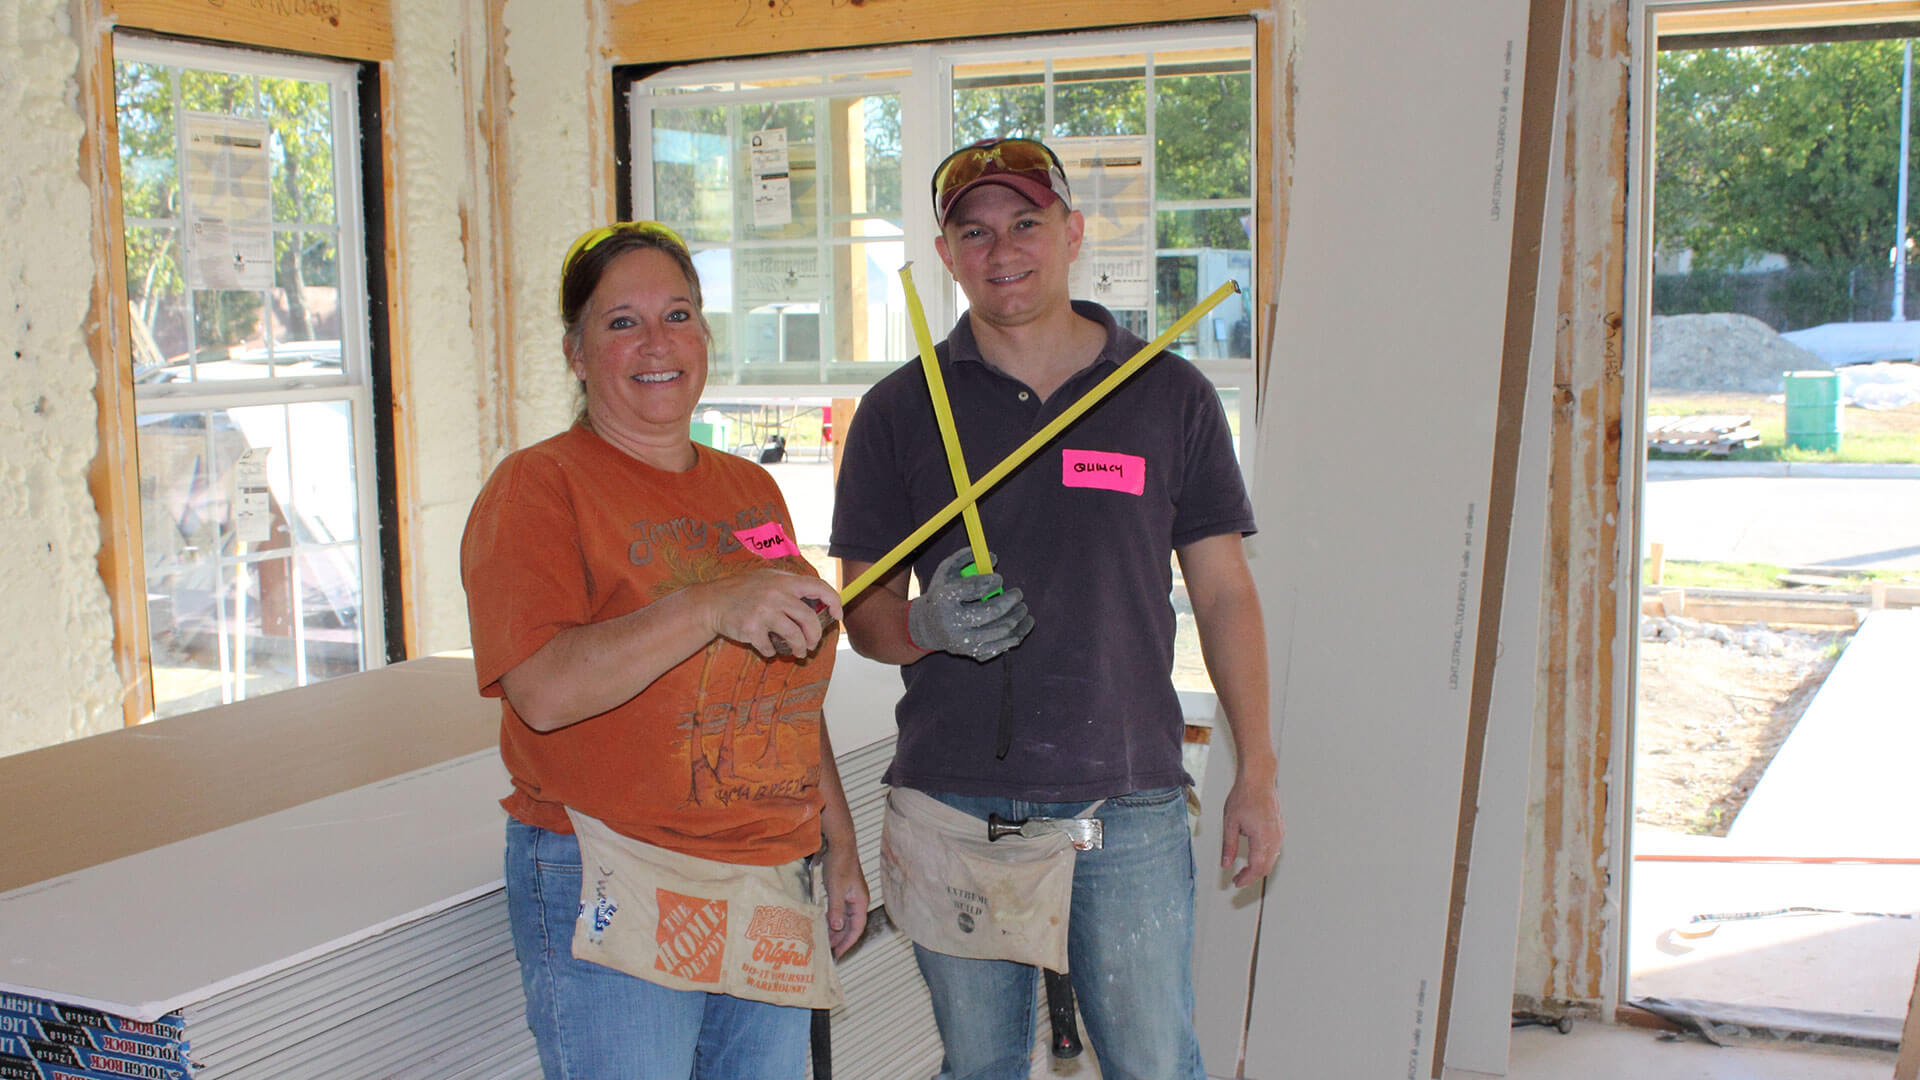 Two Hillwood employees show off their measuring tape skills at a Habitat for Humanity build.